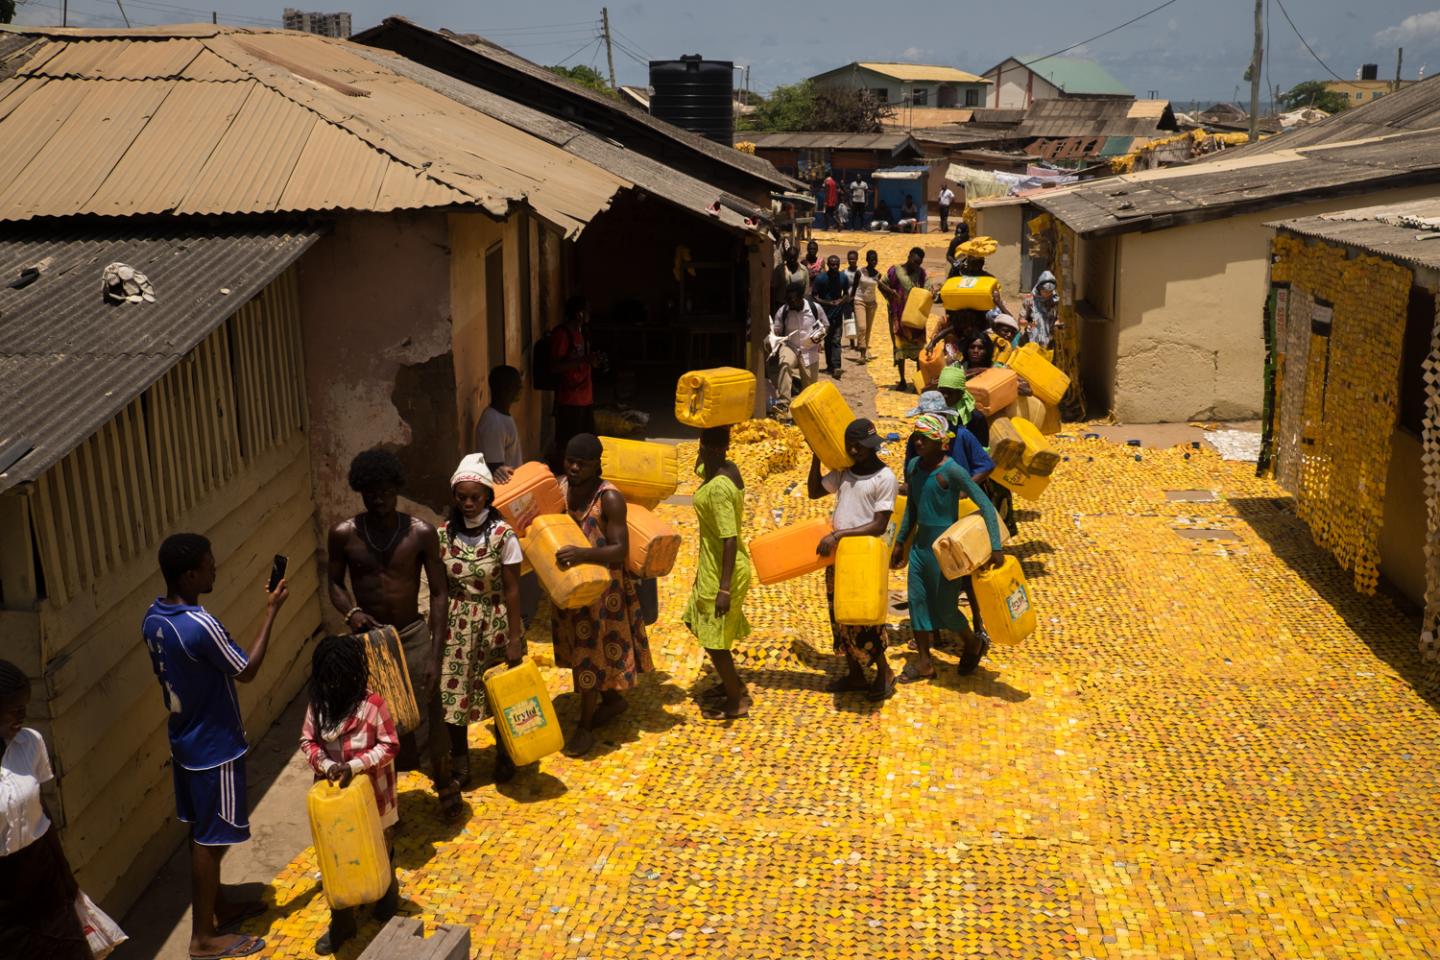 A street in Ghana with gold coloured tiling